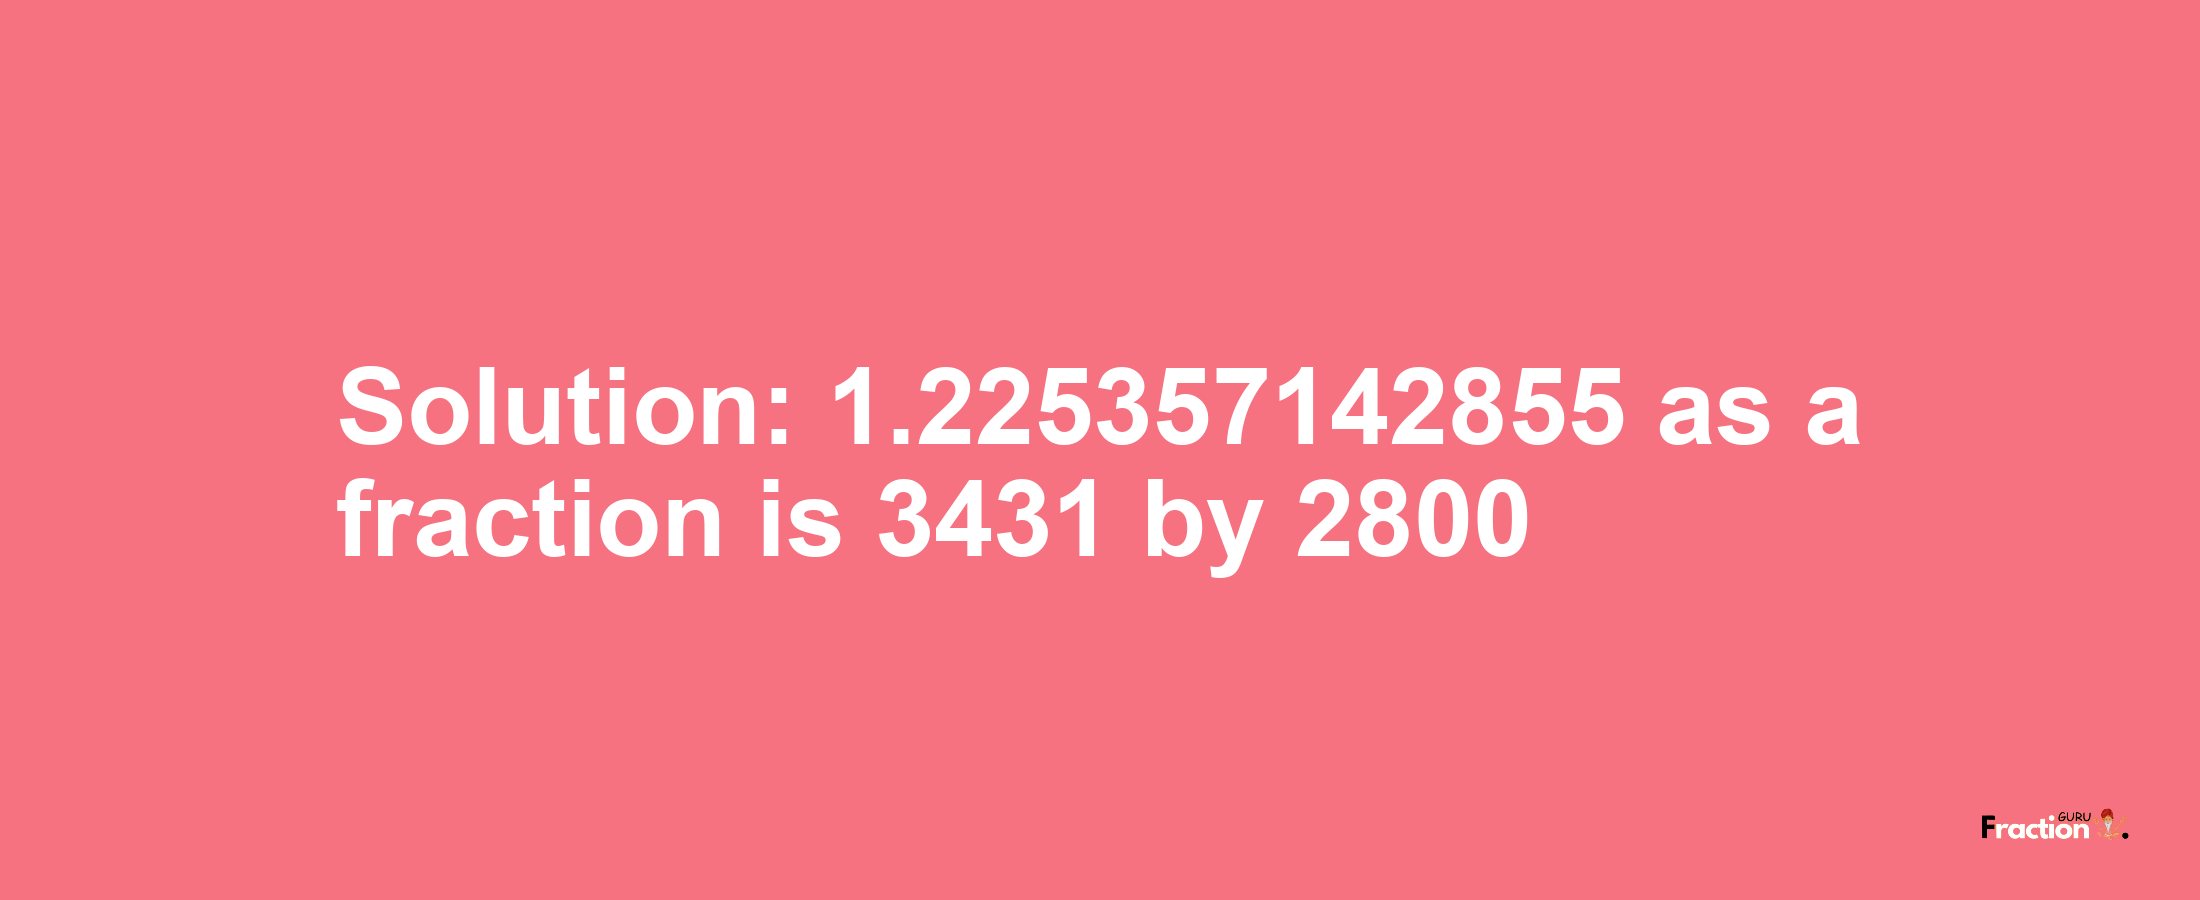 Solution:1.225357142855 as a fraction is 3431/2800